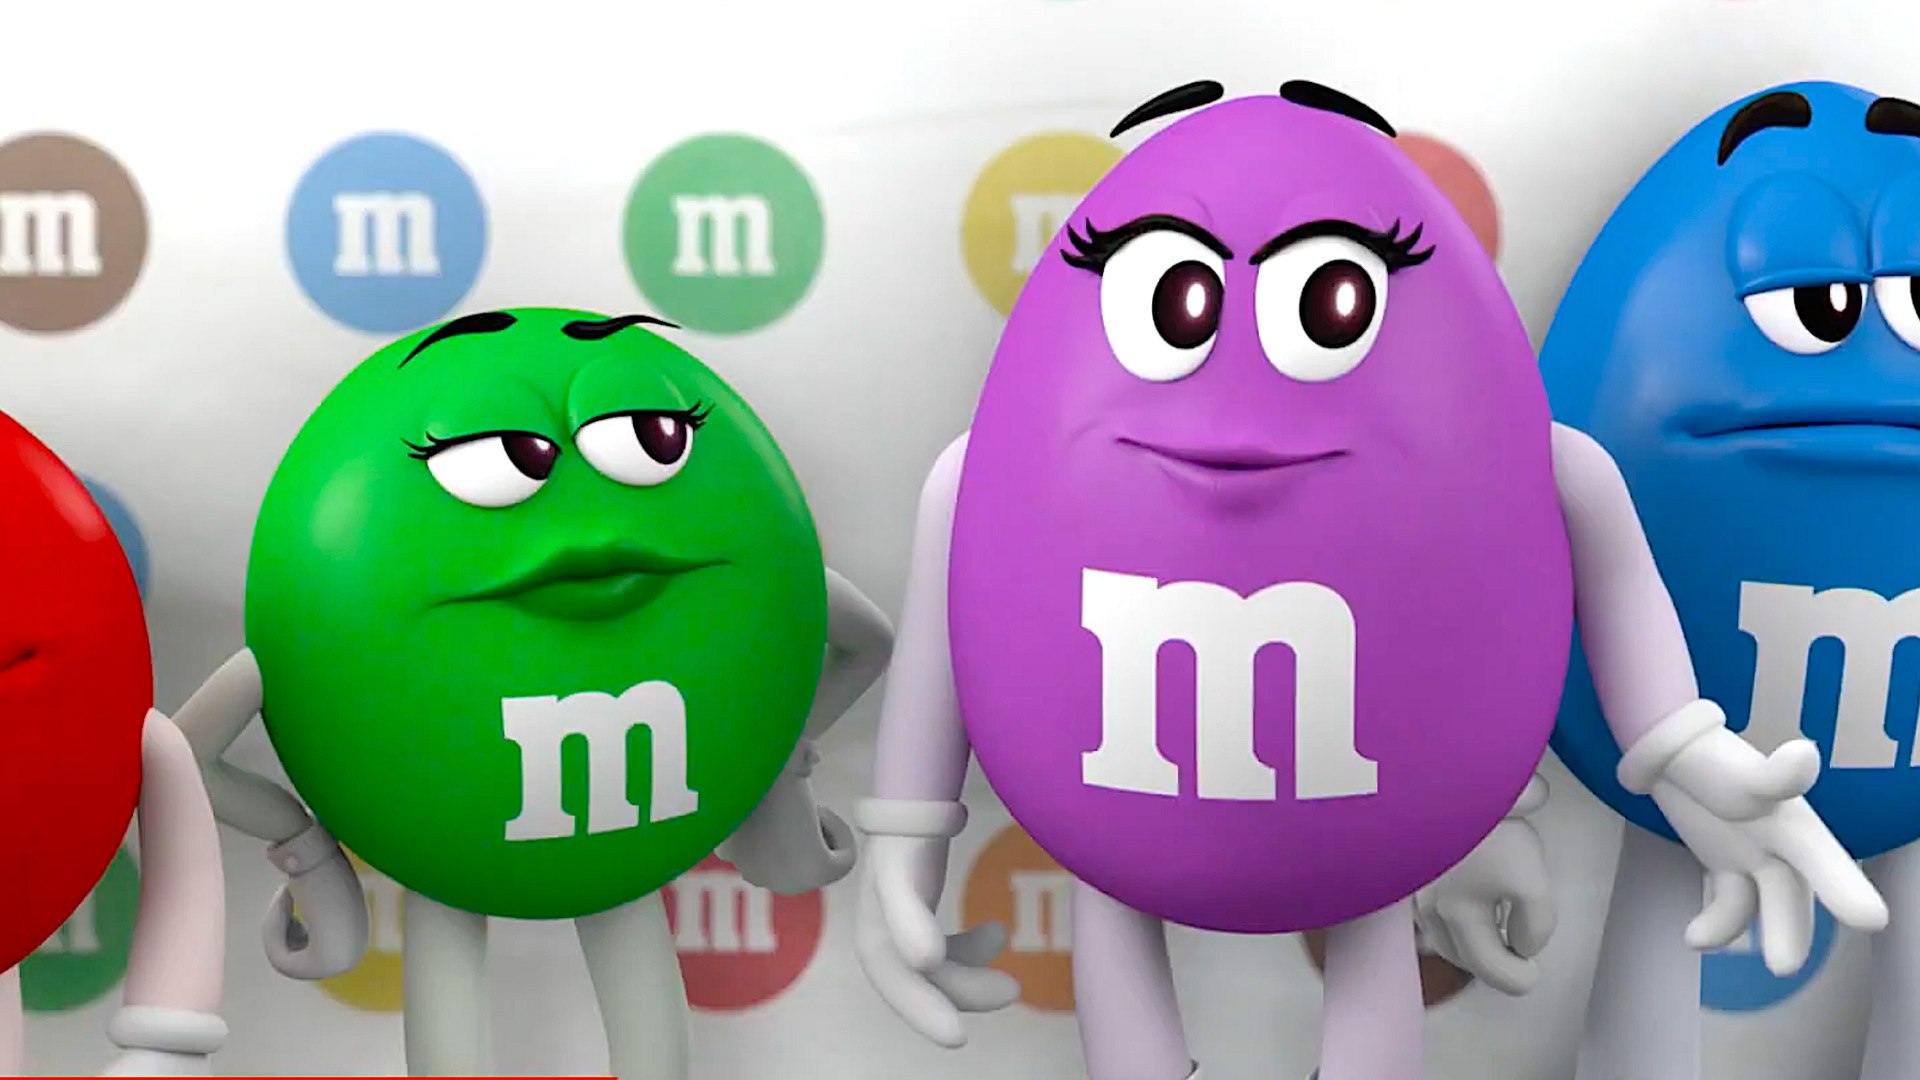 M&M's looks to make people smile in its Super Bowl commercial